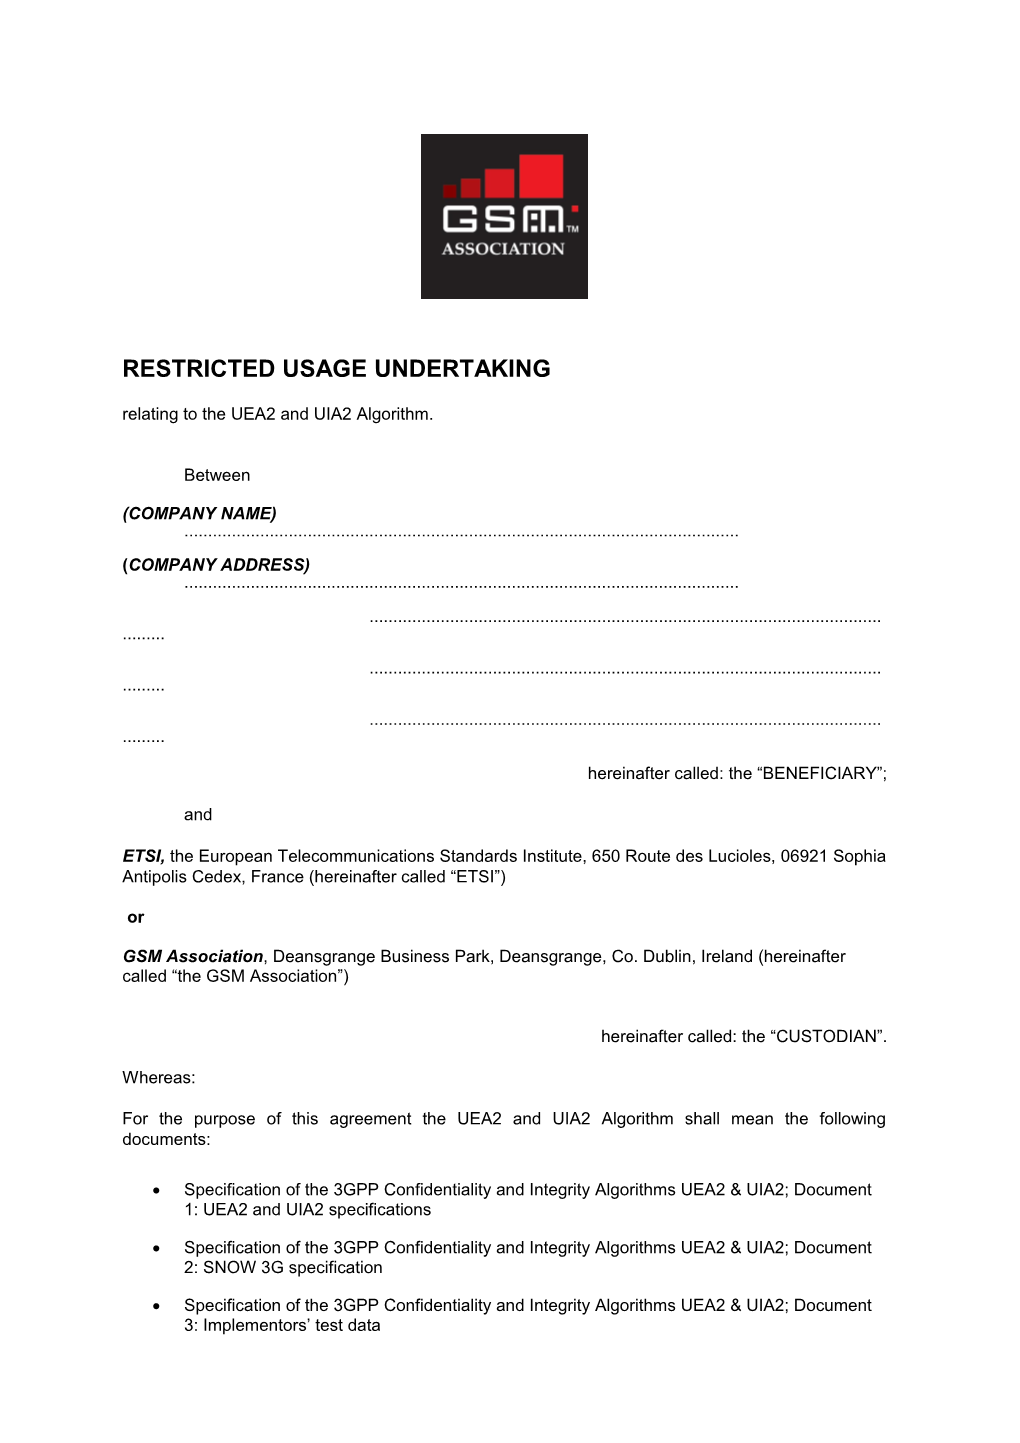 Management Agreement for the Distribution of GPRS Algorithm